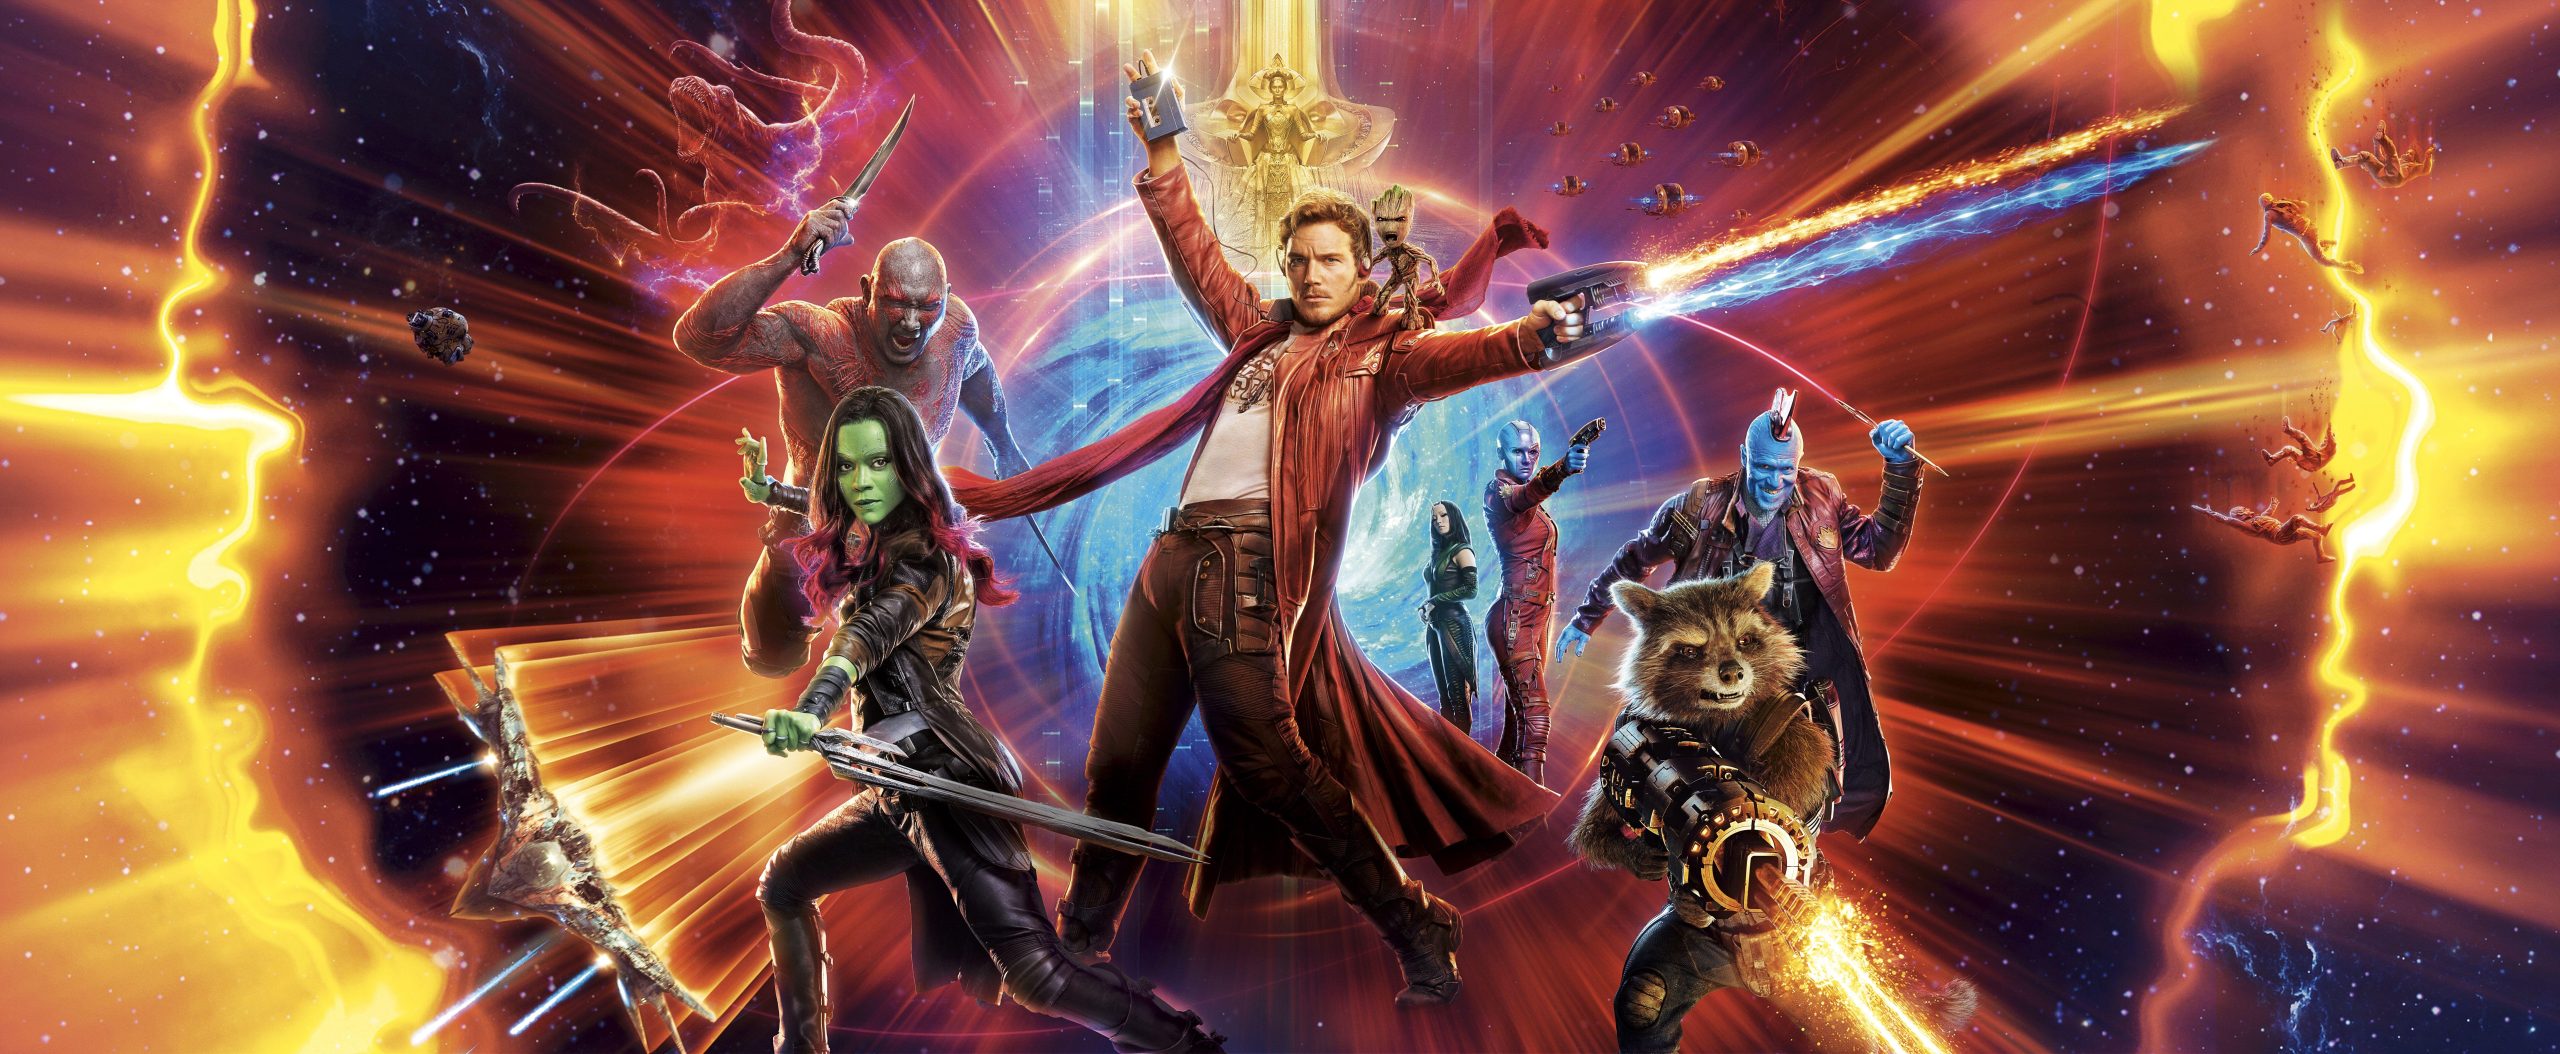 Guardians Of The Galaxy Videogame 1080p Wallpaper, Guardians Of The Galaxy Videogame, Movies